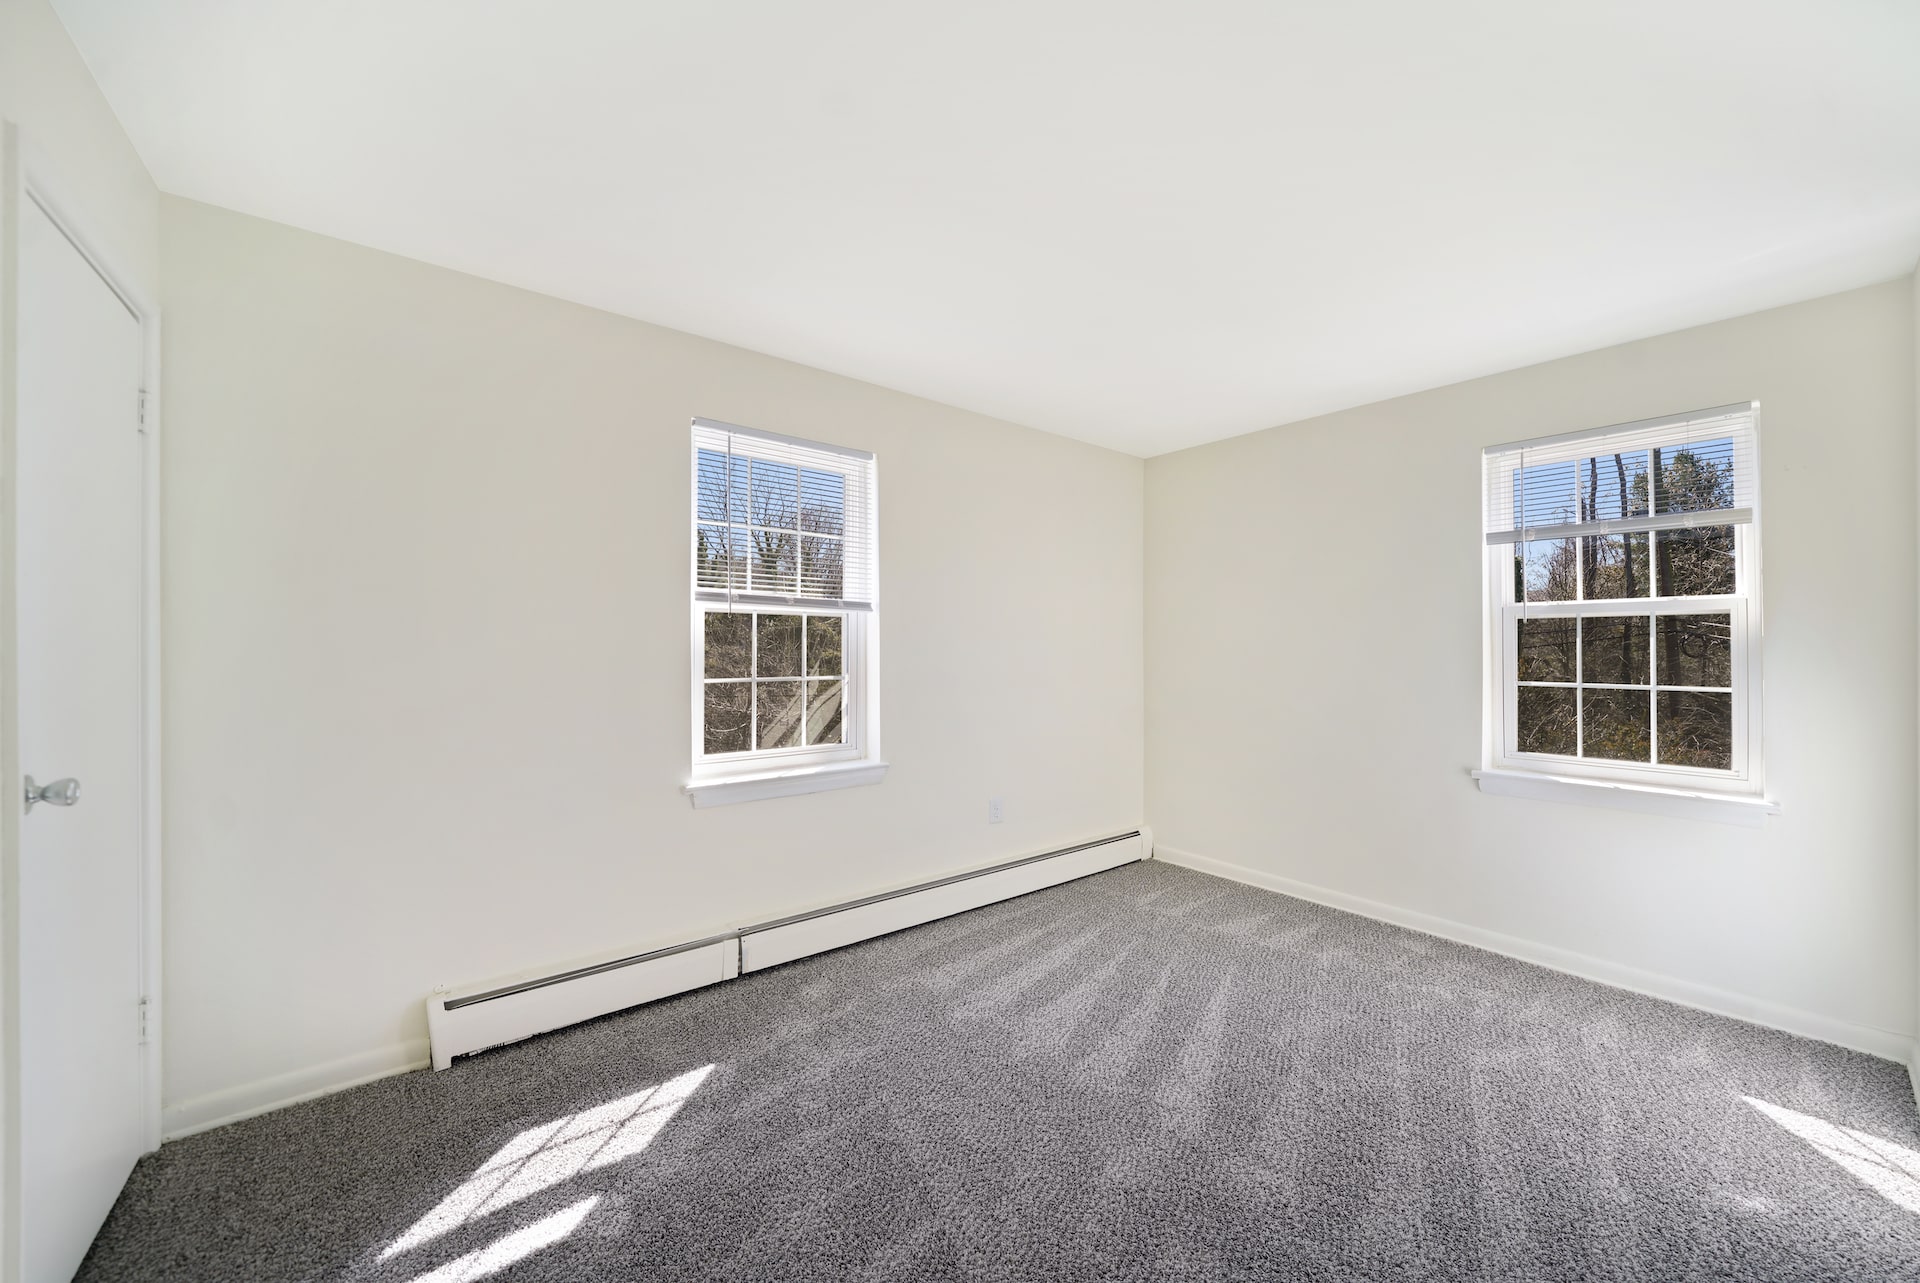 Carpeted bedroom area with 2 windows.